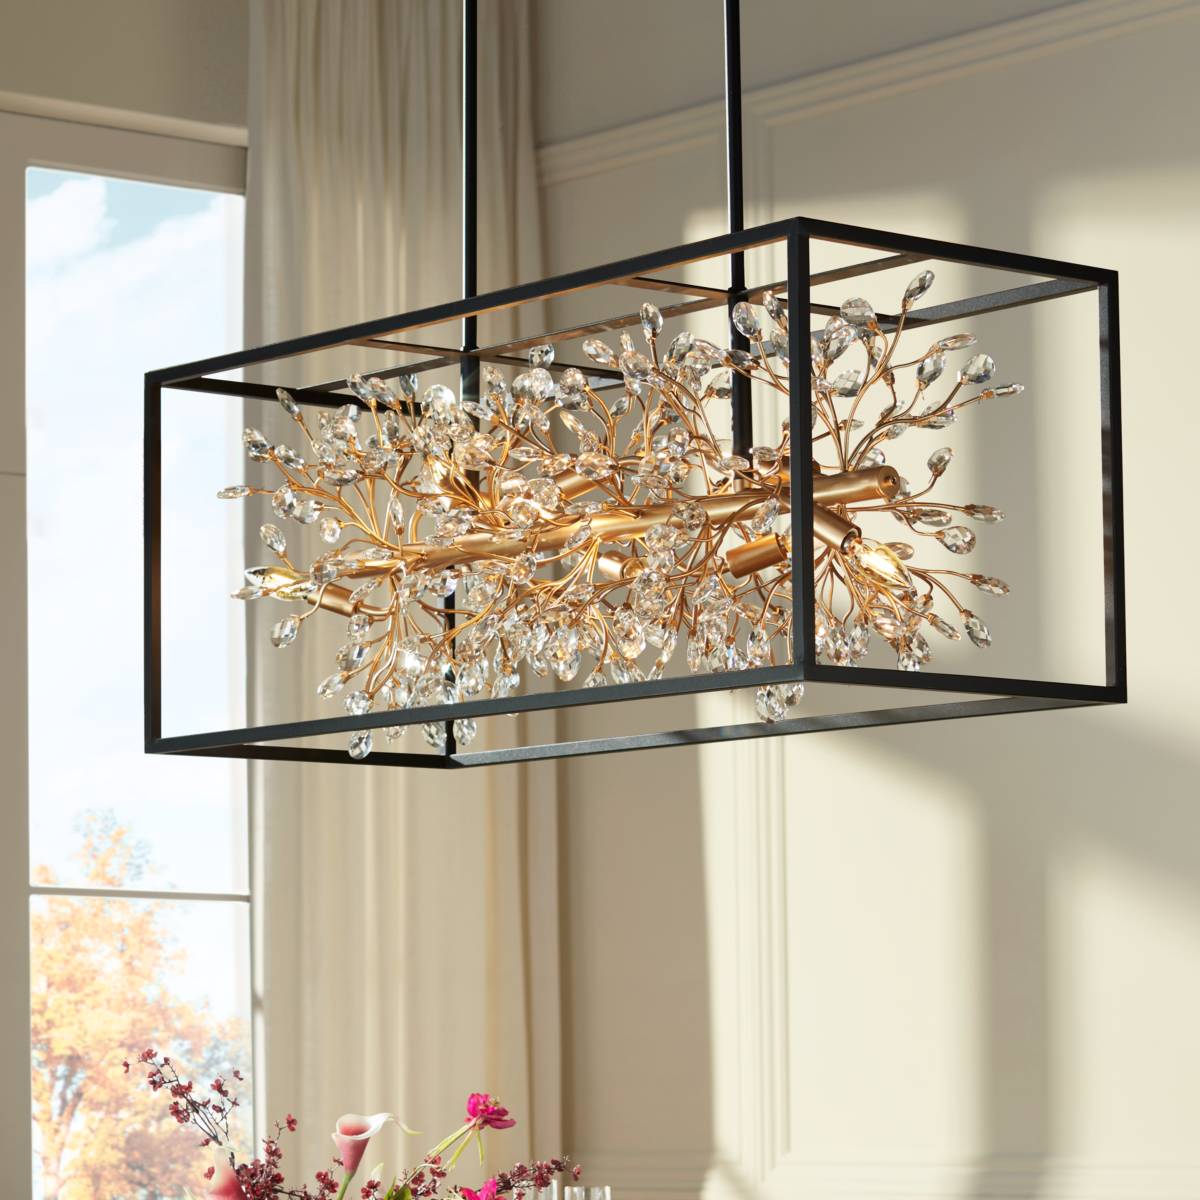 Primitiv Produktionscenter Piping Modern Lighting and Decor - Contemporary Design | Lamps Plus